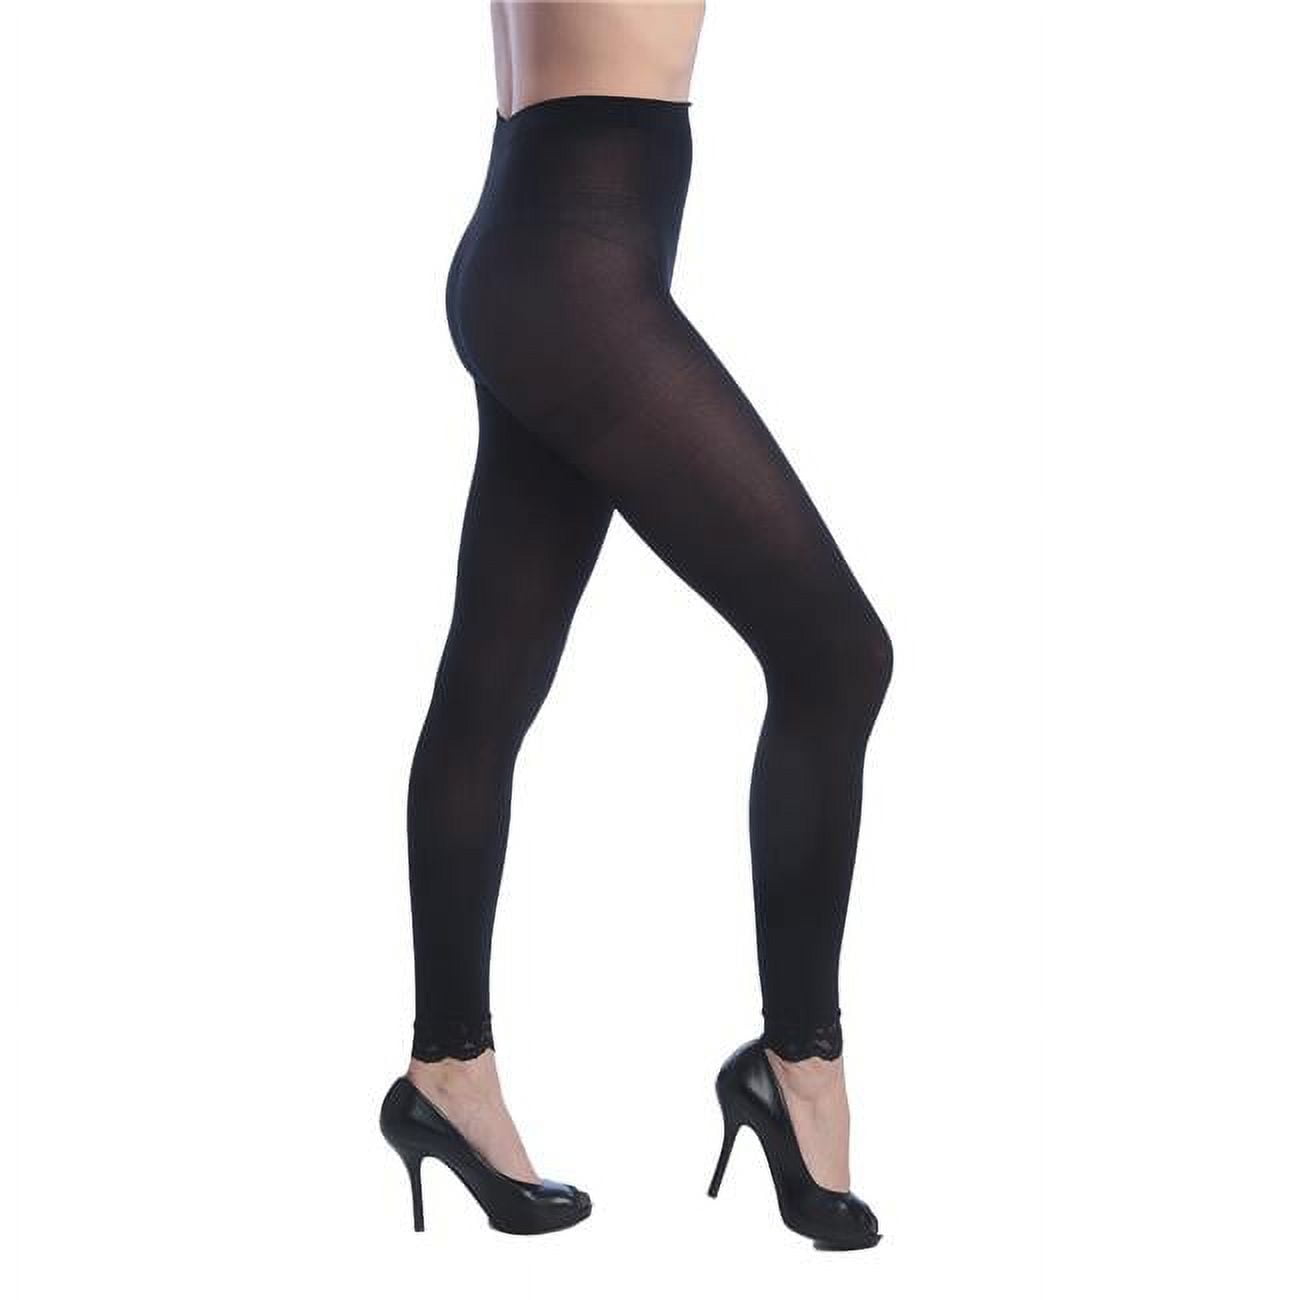 Women Opaque Control Top Footless Lace Tights, Black - One Size